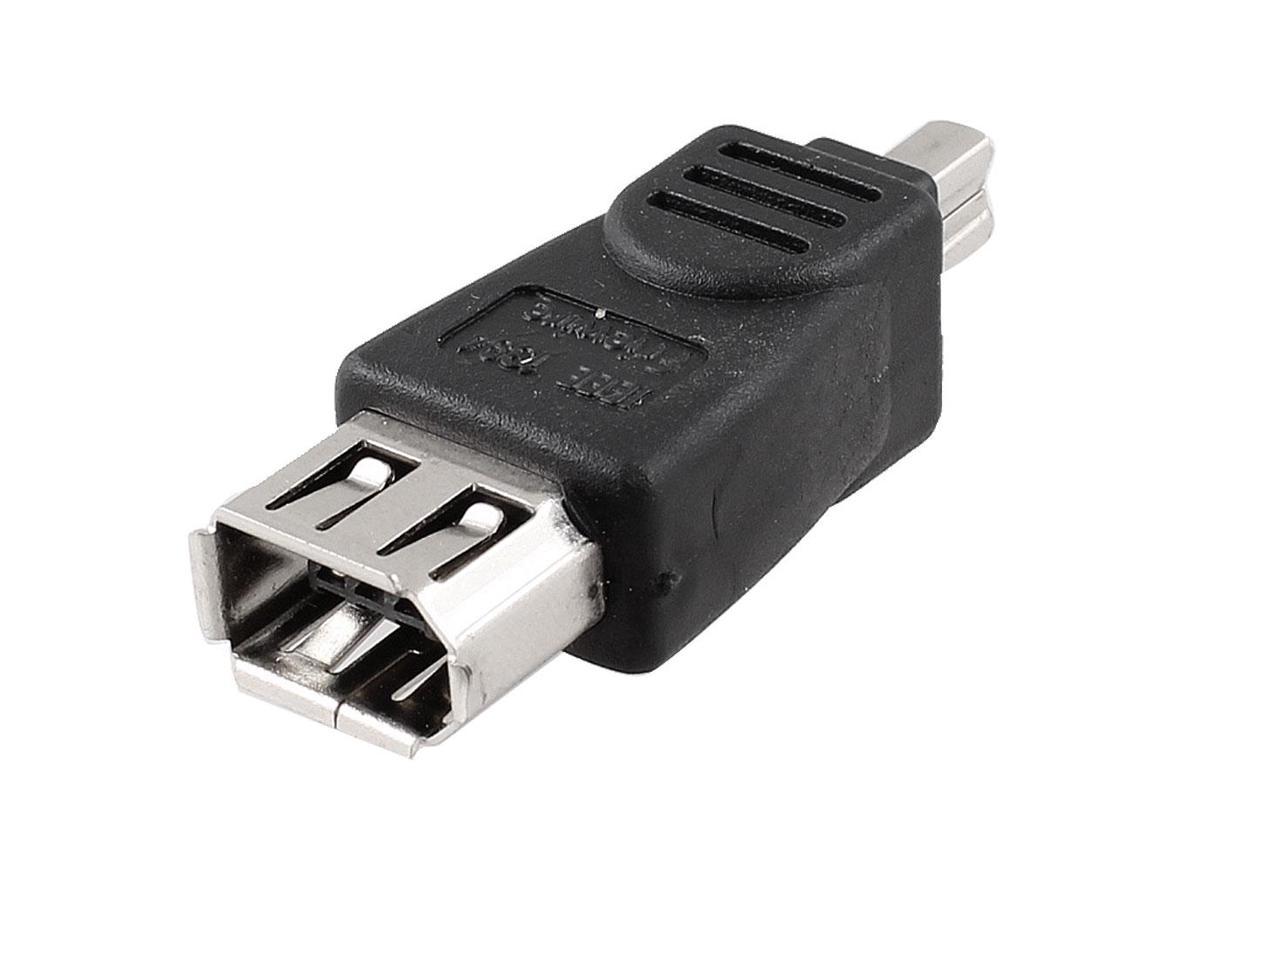 Micro Connectors Inc 15 feet Firewire IEEE 1394 6 Pin to 4 Pin Cable E07-218 